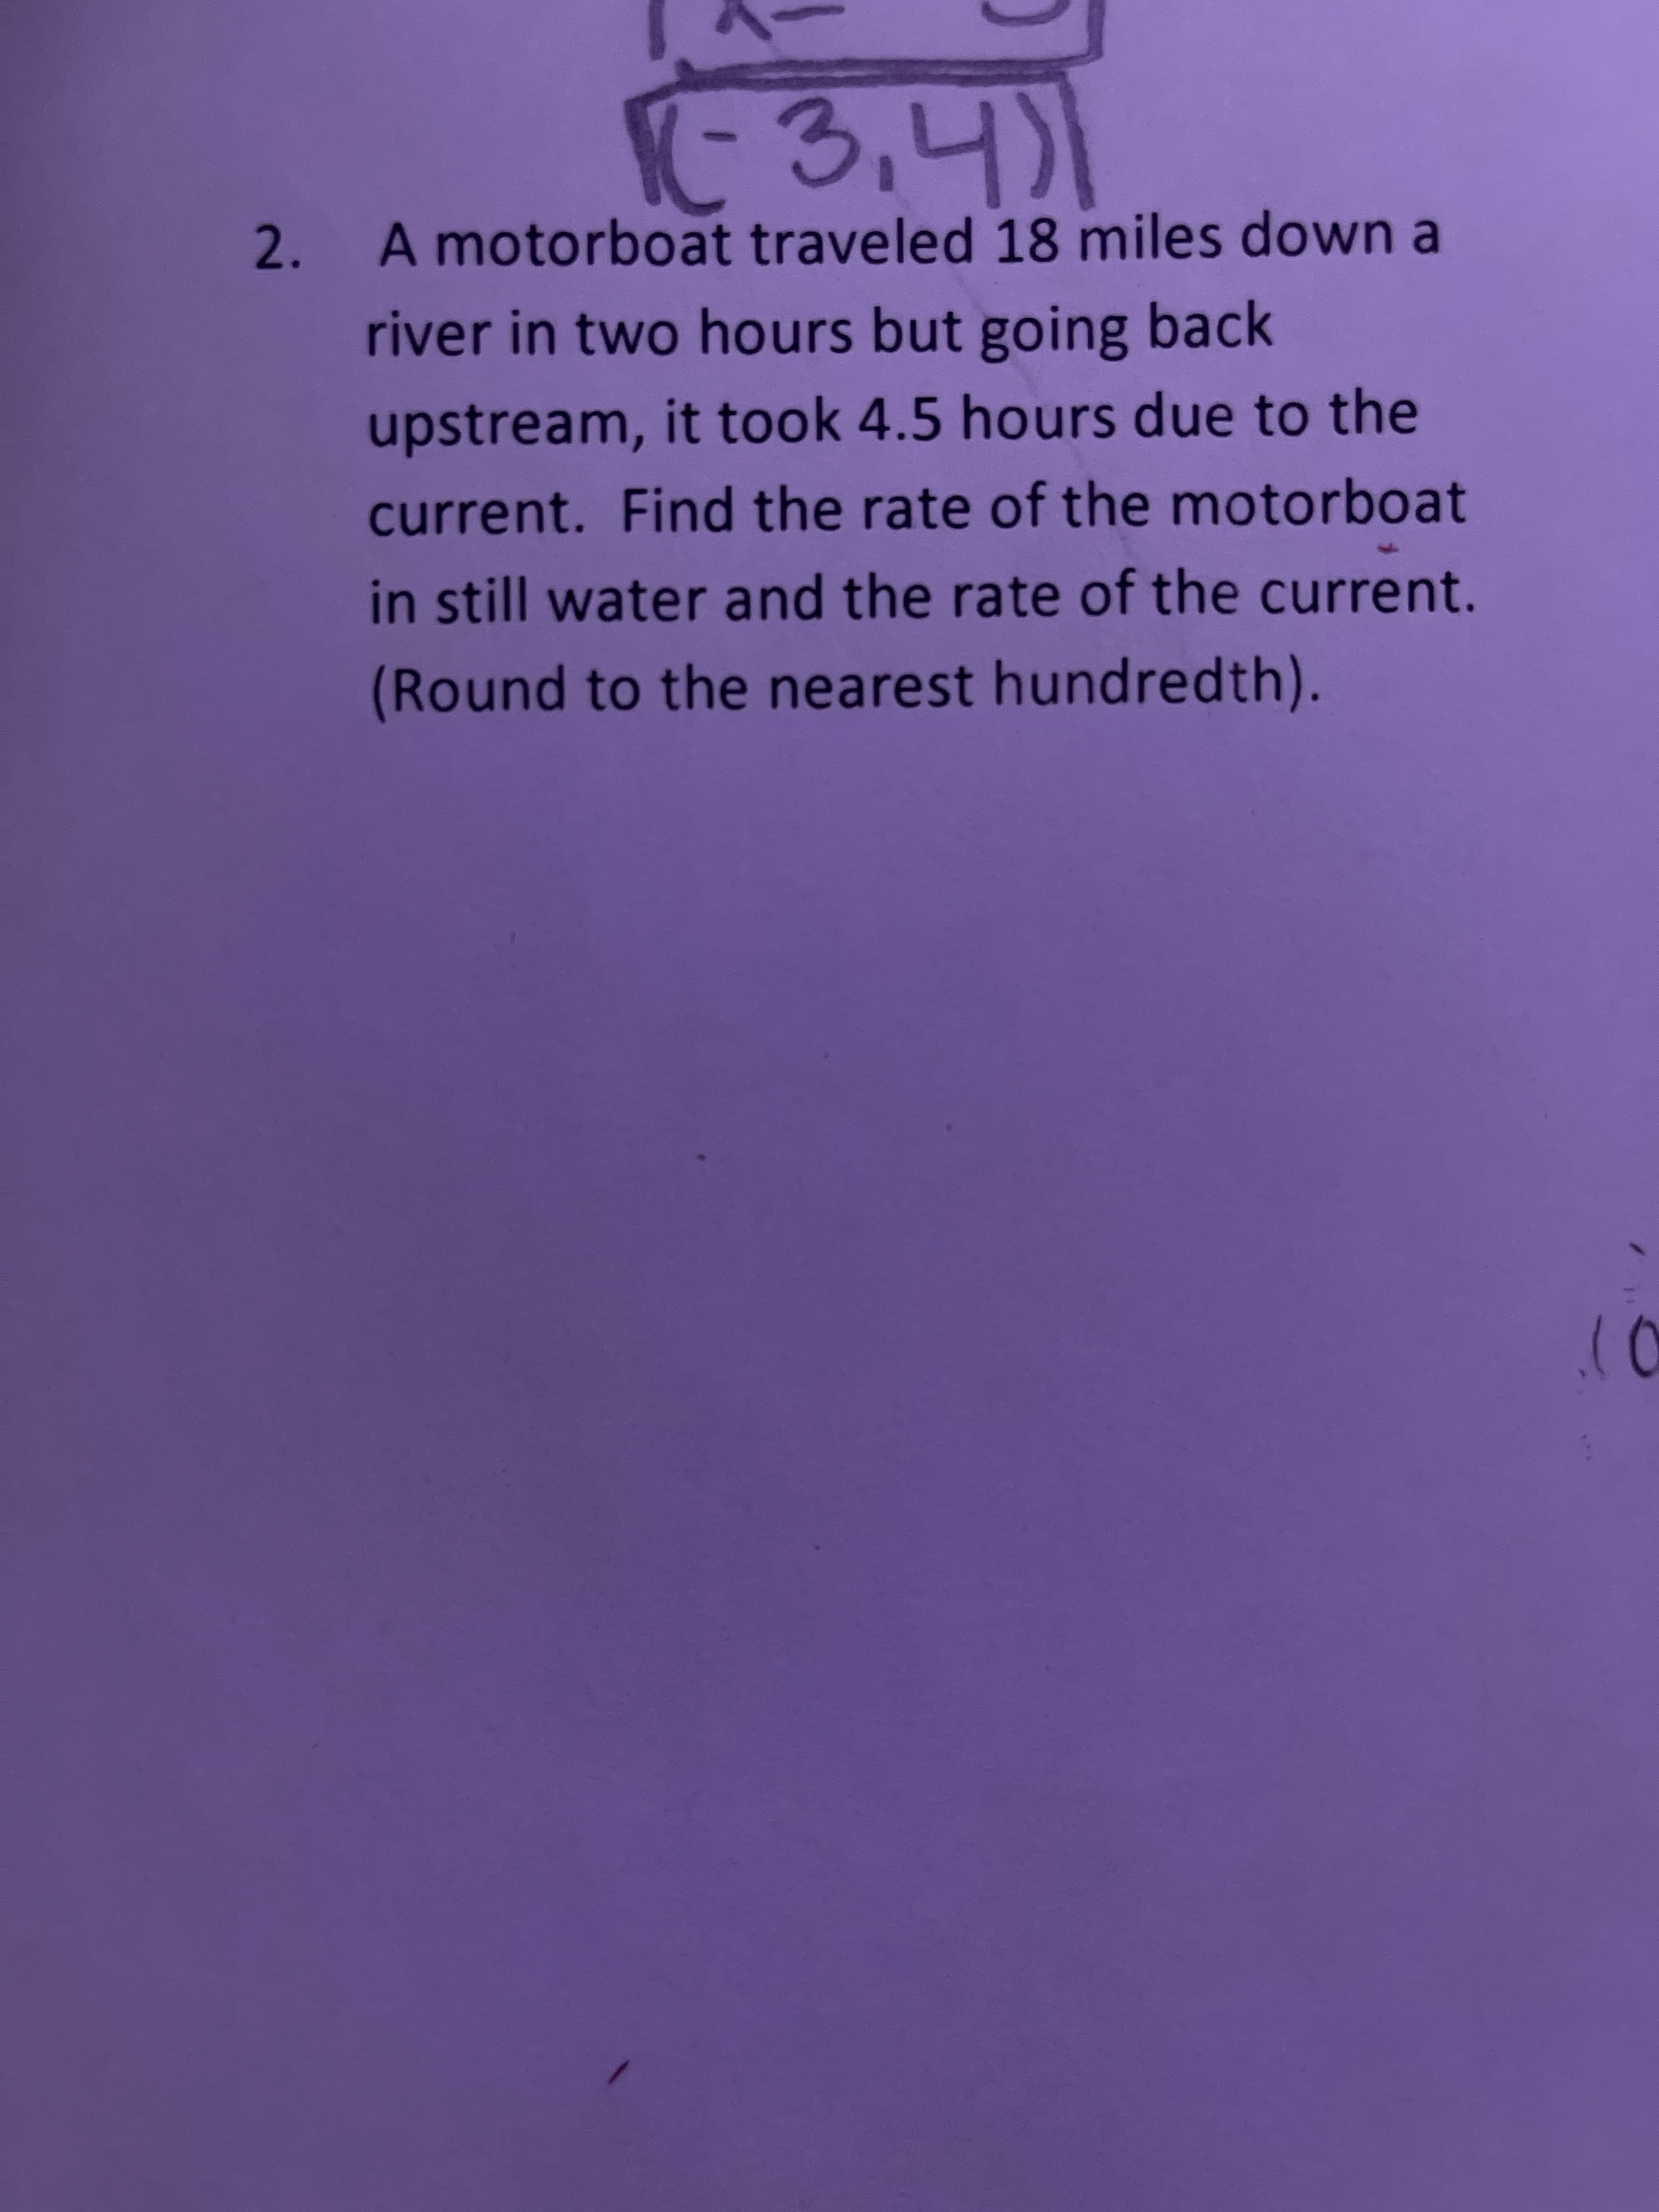 3,4)1
2.
A motorboat traveled 18 miles down a
river in two hours but going back
upstream, it took 4.5 hours due to the
current. Find the rate of the motorboat
in still water and the rate of the current.
(Round to the nearest hundredth).
10
